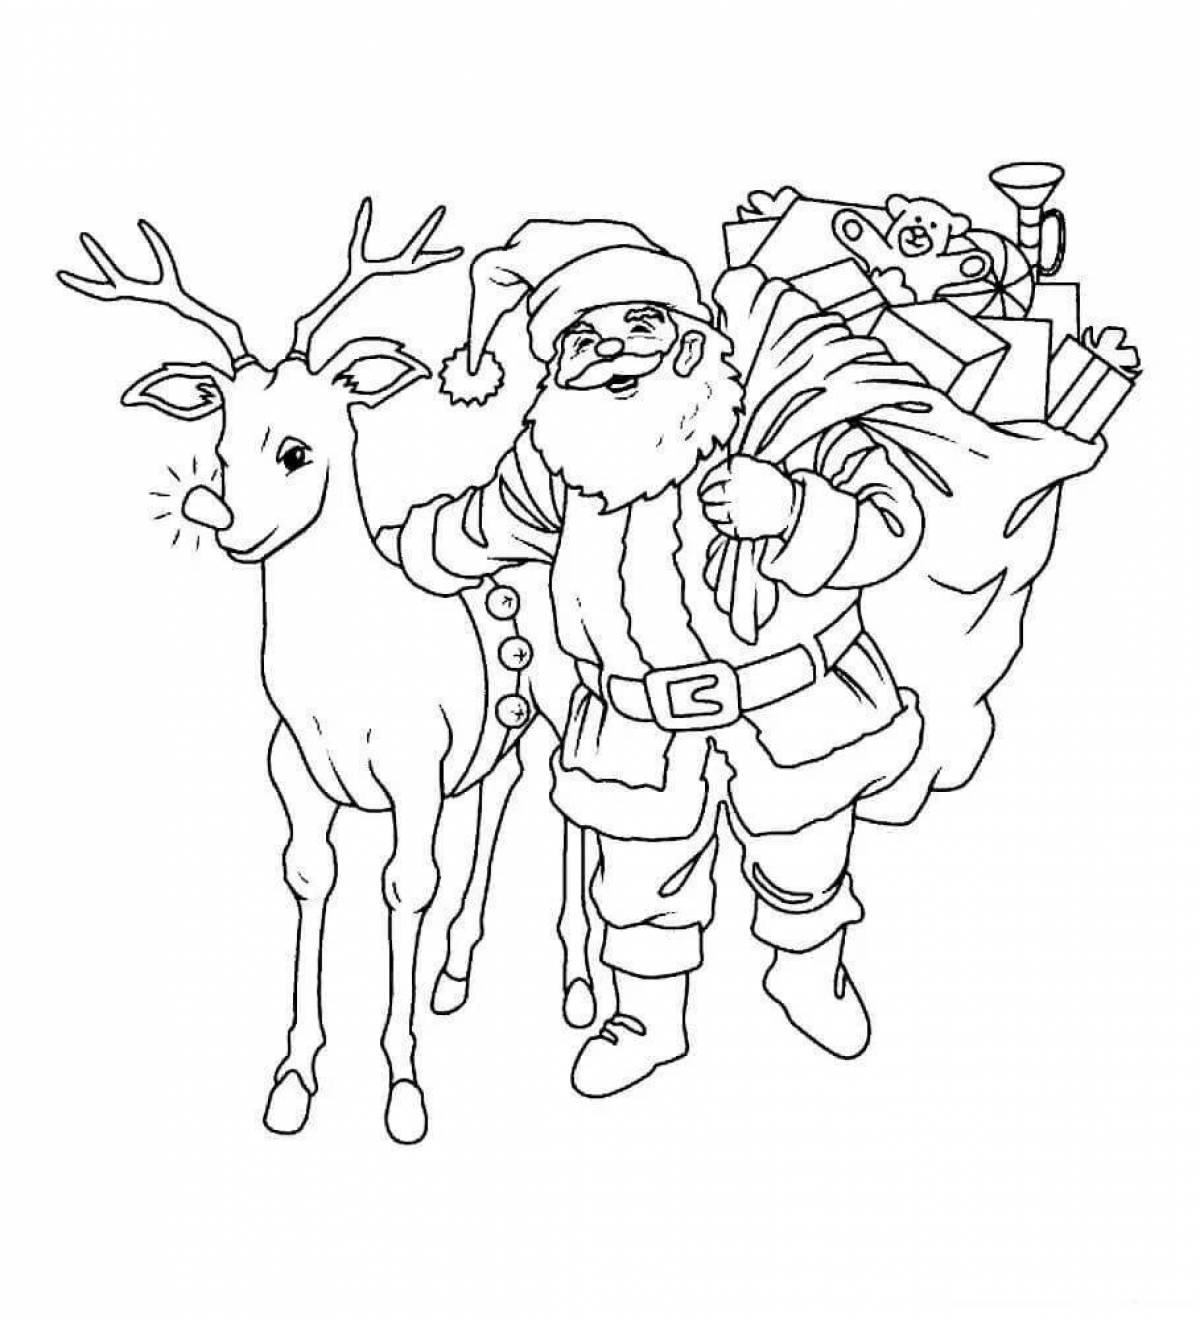 Exciting cool Christmas coloring book